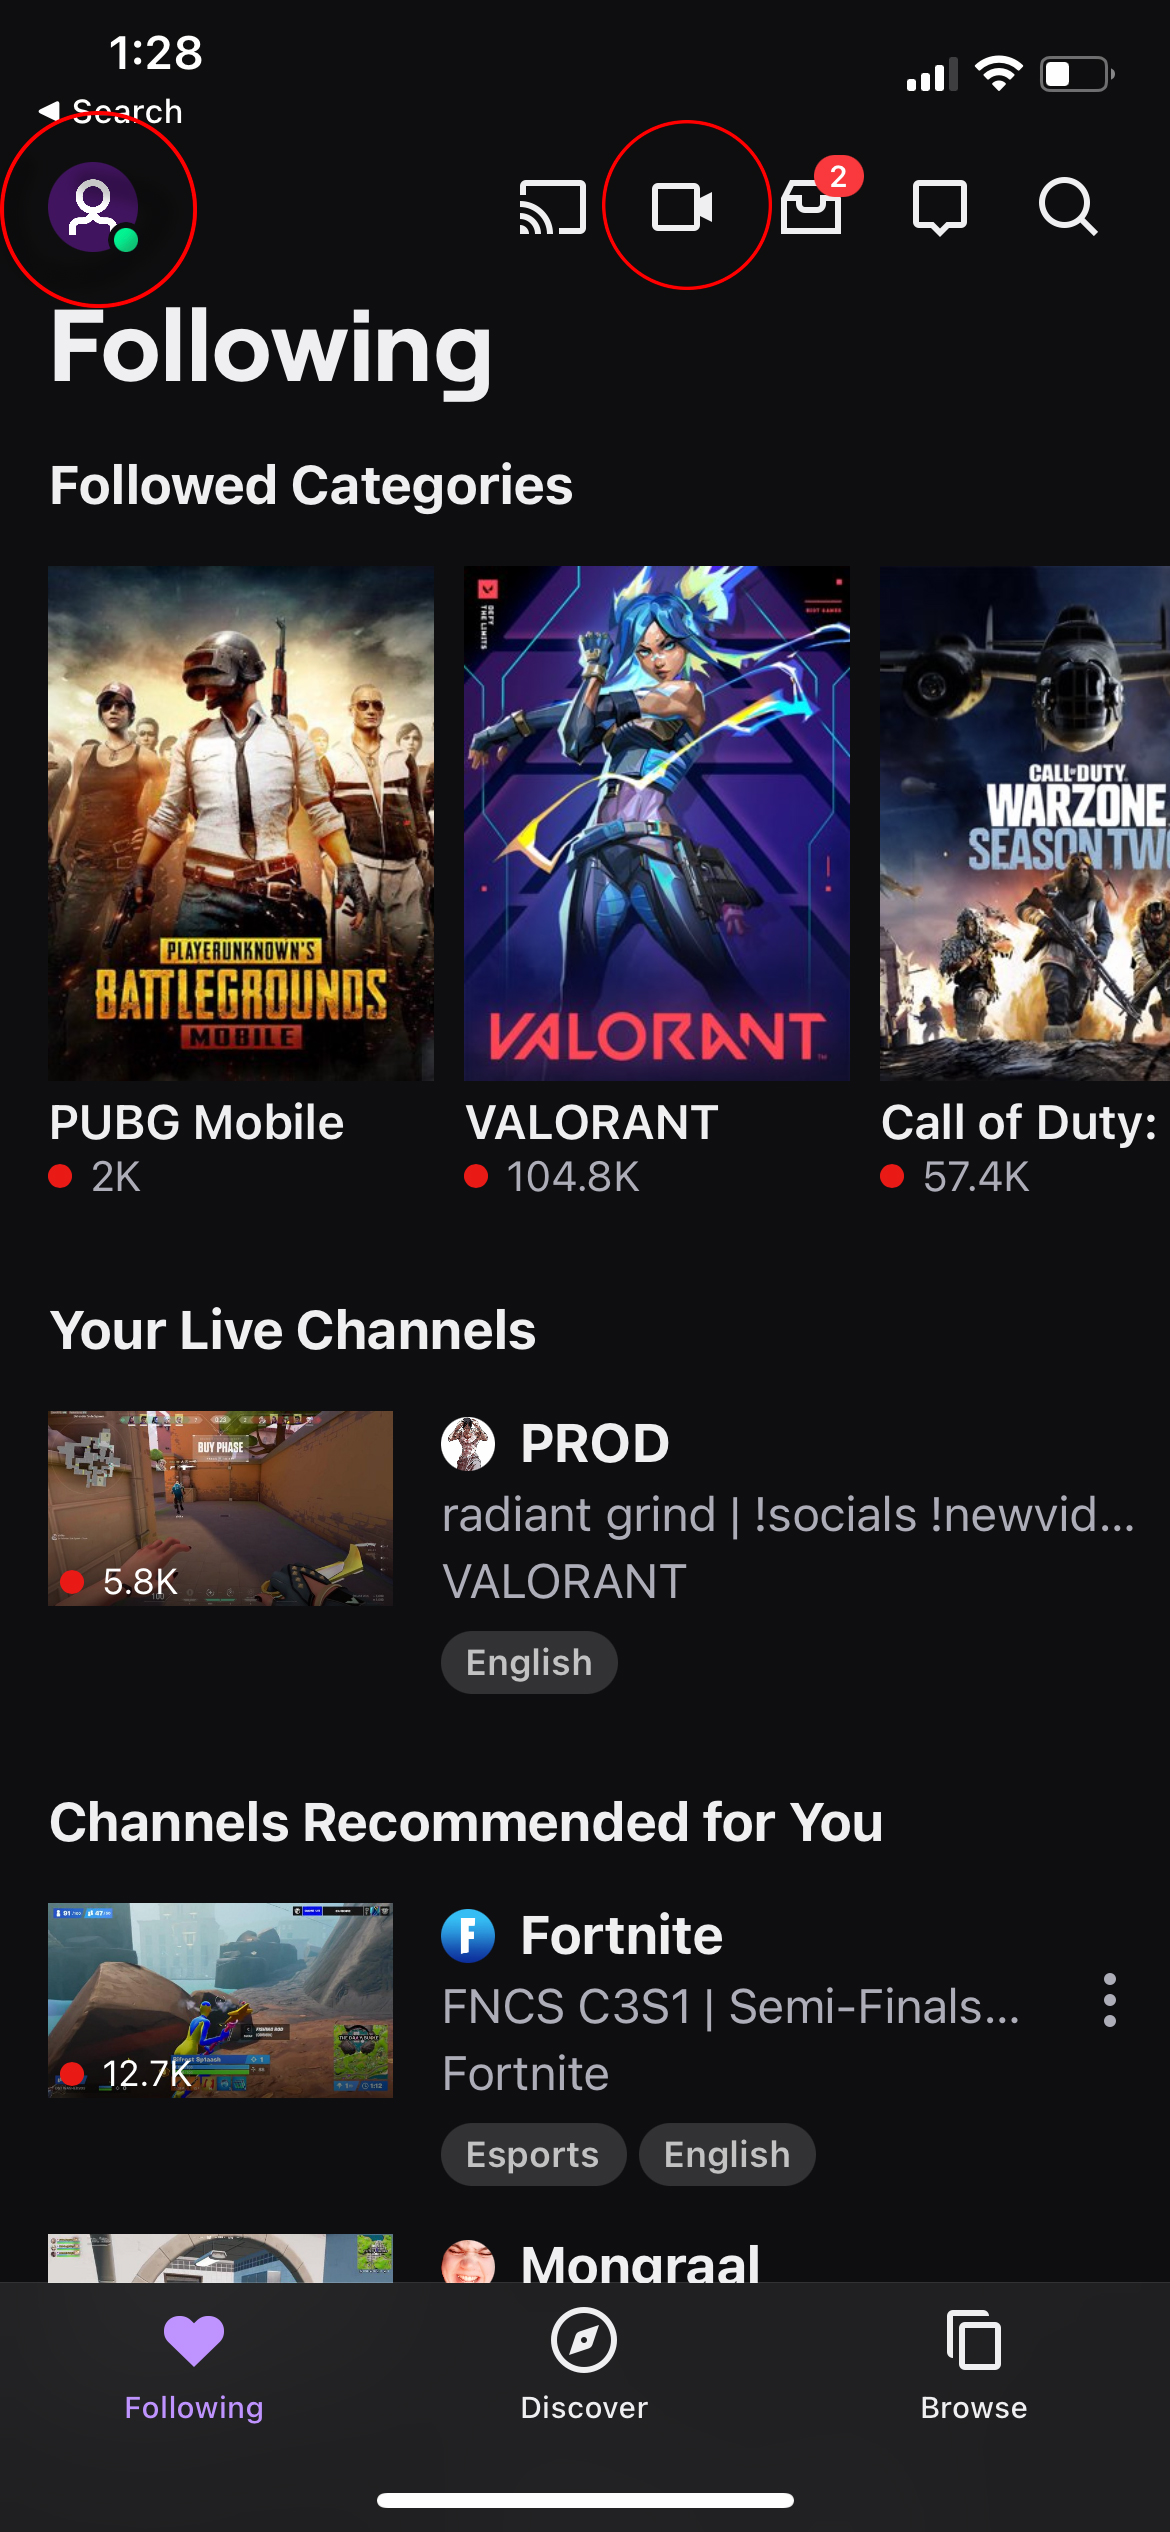  Heres how you can start streaming on Twitch with just a smartphone